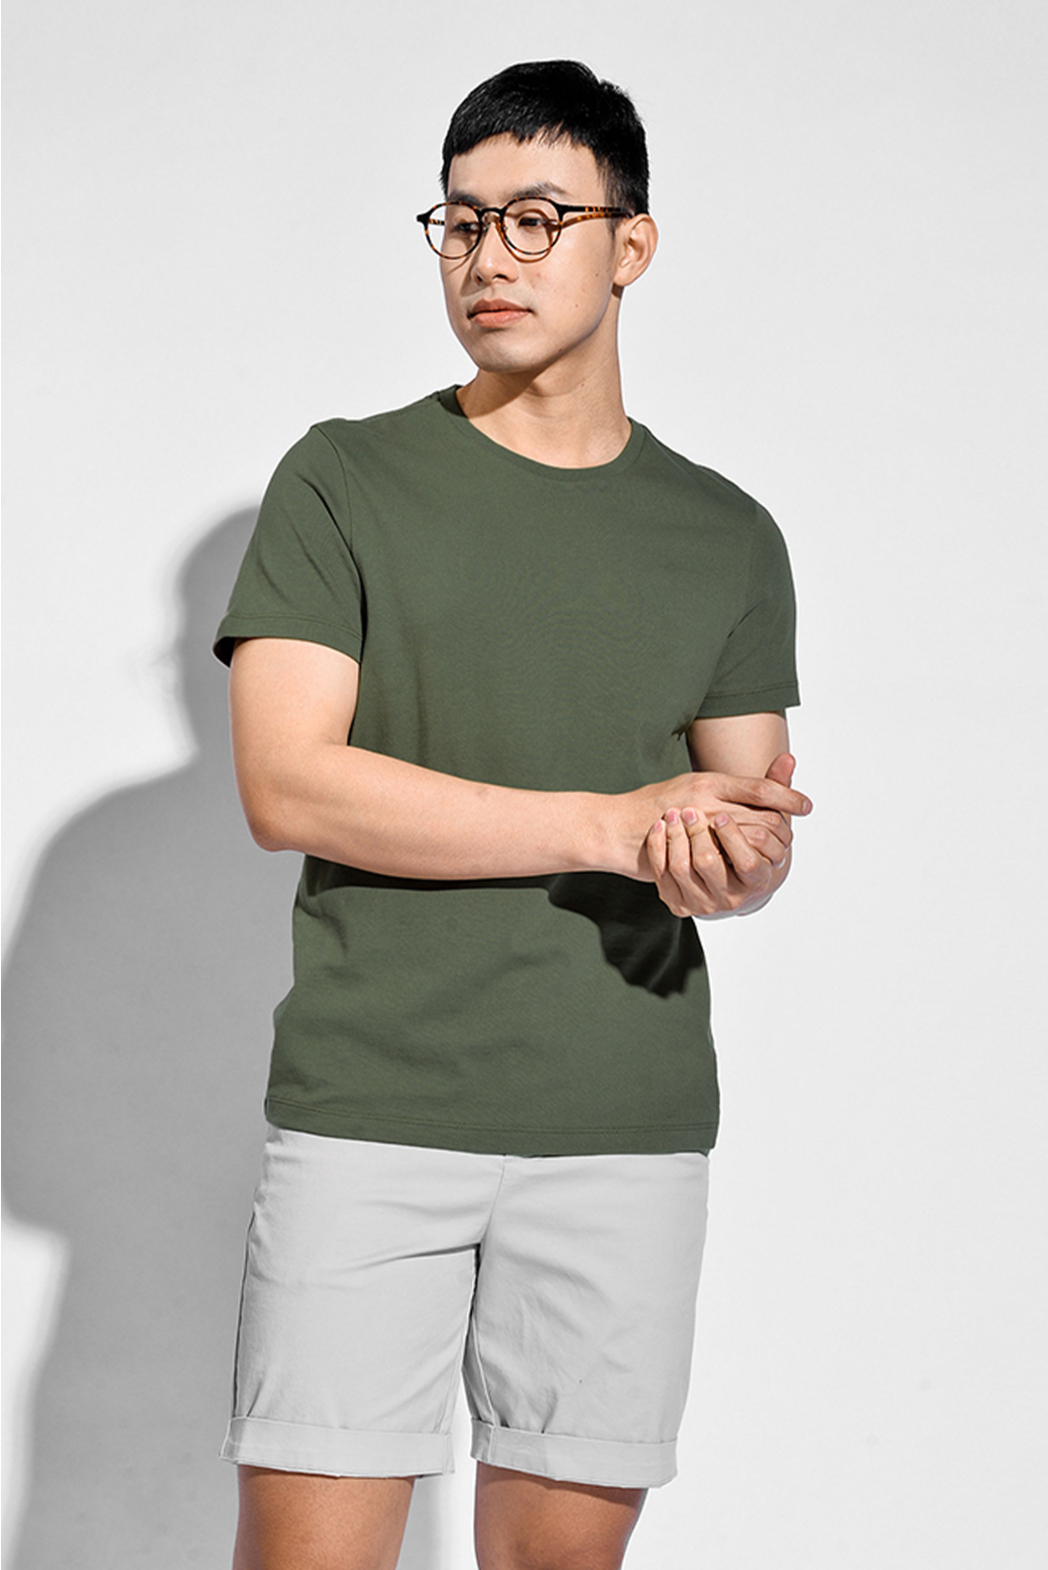 Áo thun tay ngắn Solid Cotton FITTED form – 10S20TSH042